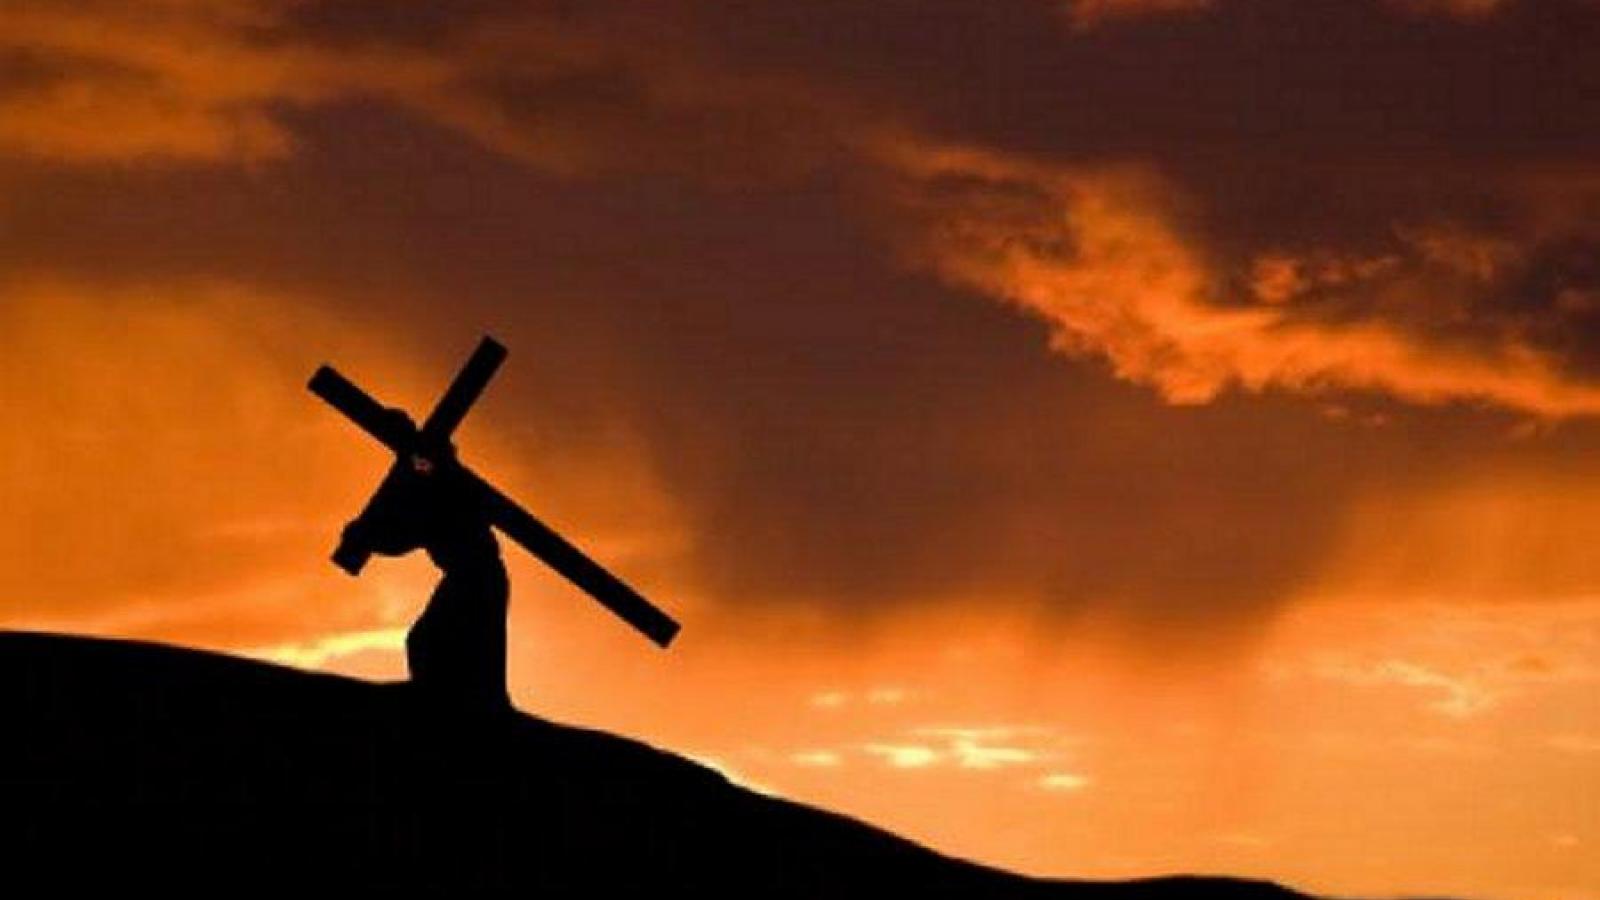 With The Cross Wallpaper HD